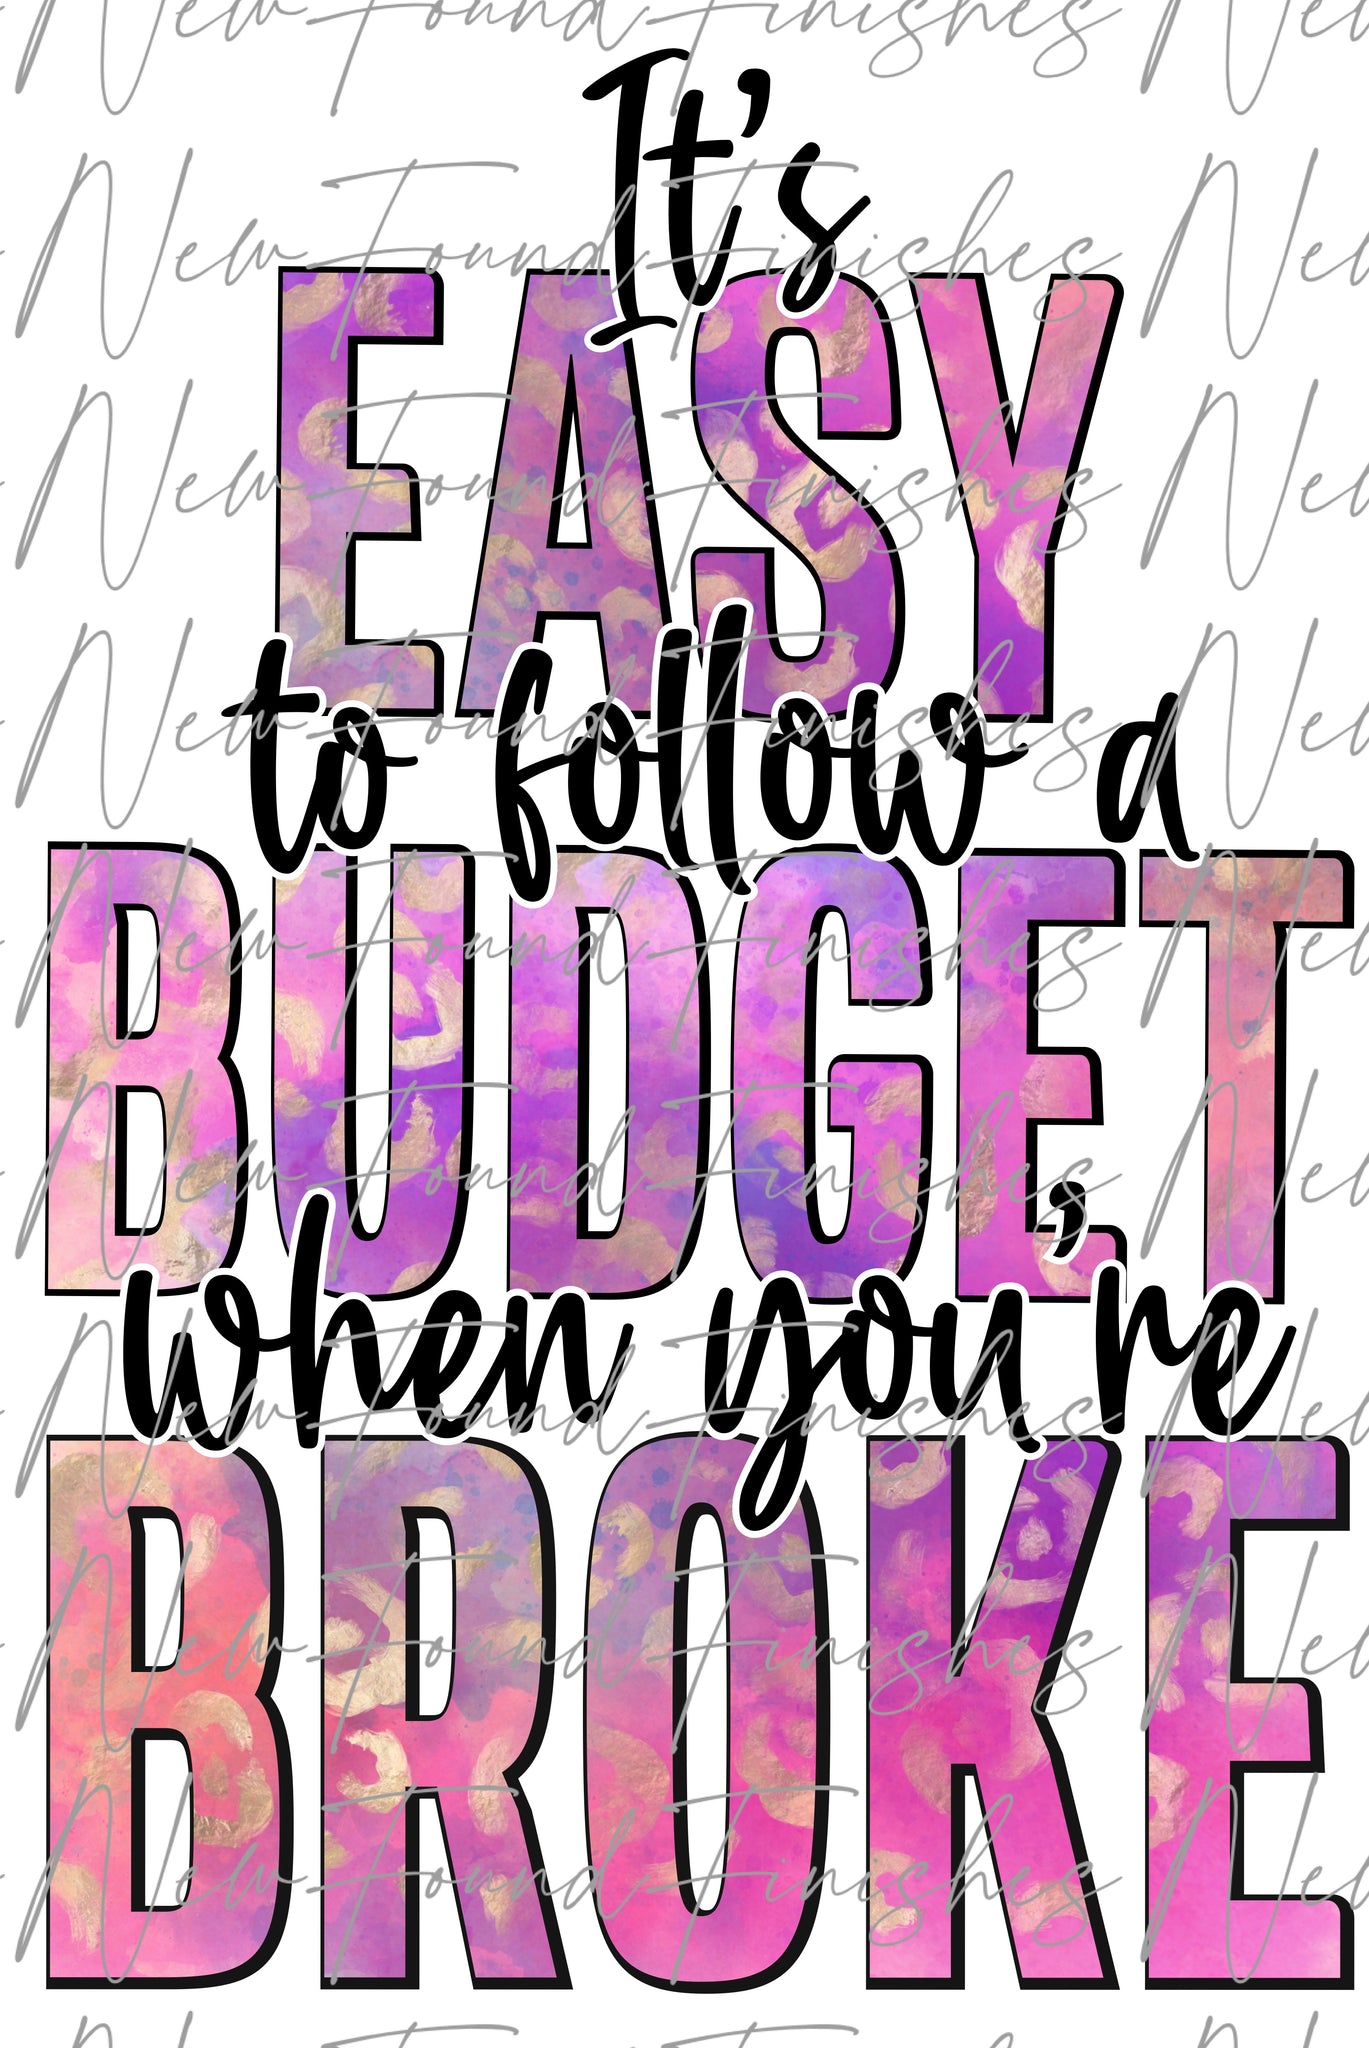 It’s easy to follow a budget